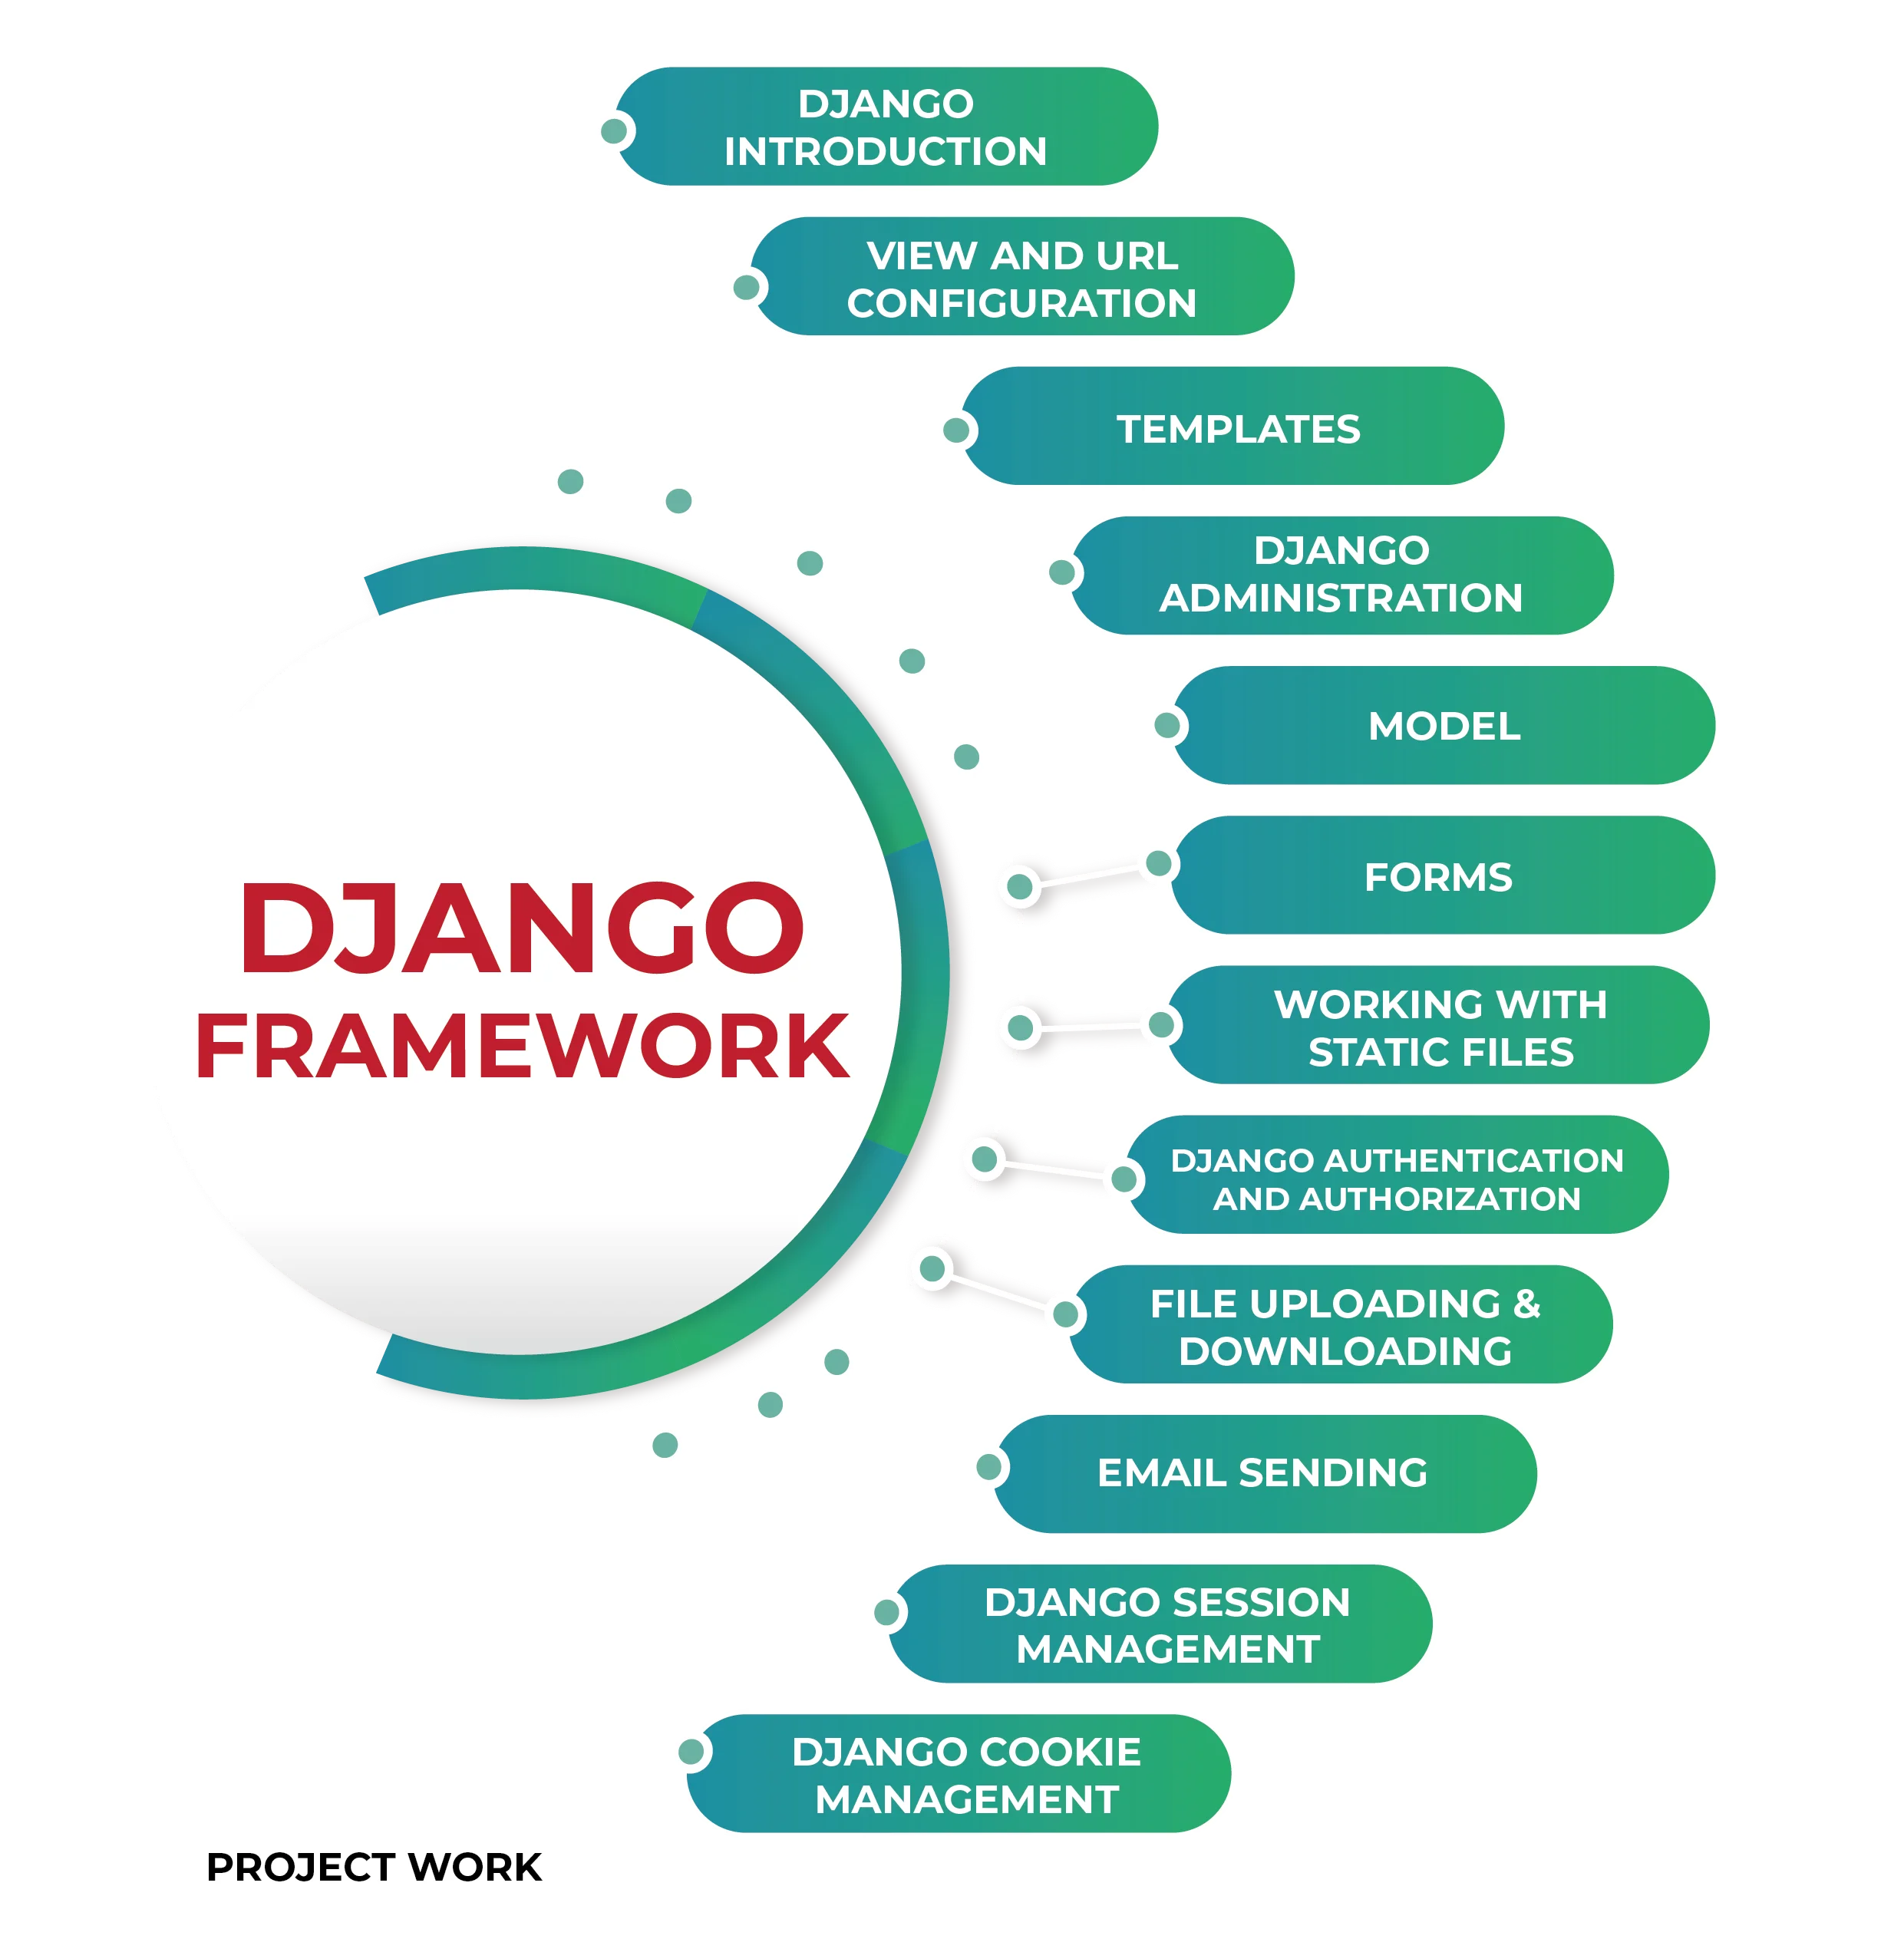 incapp what you learn django section